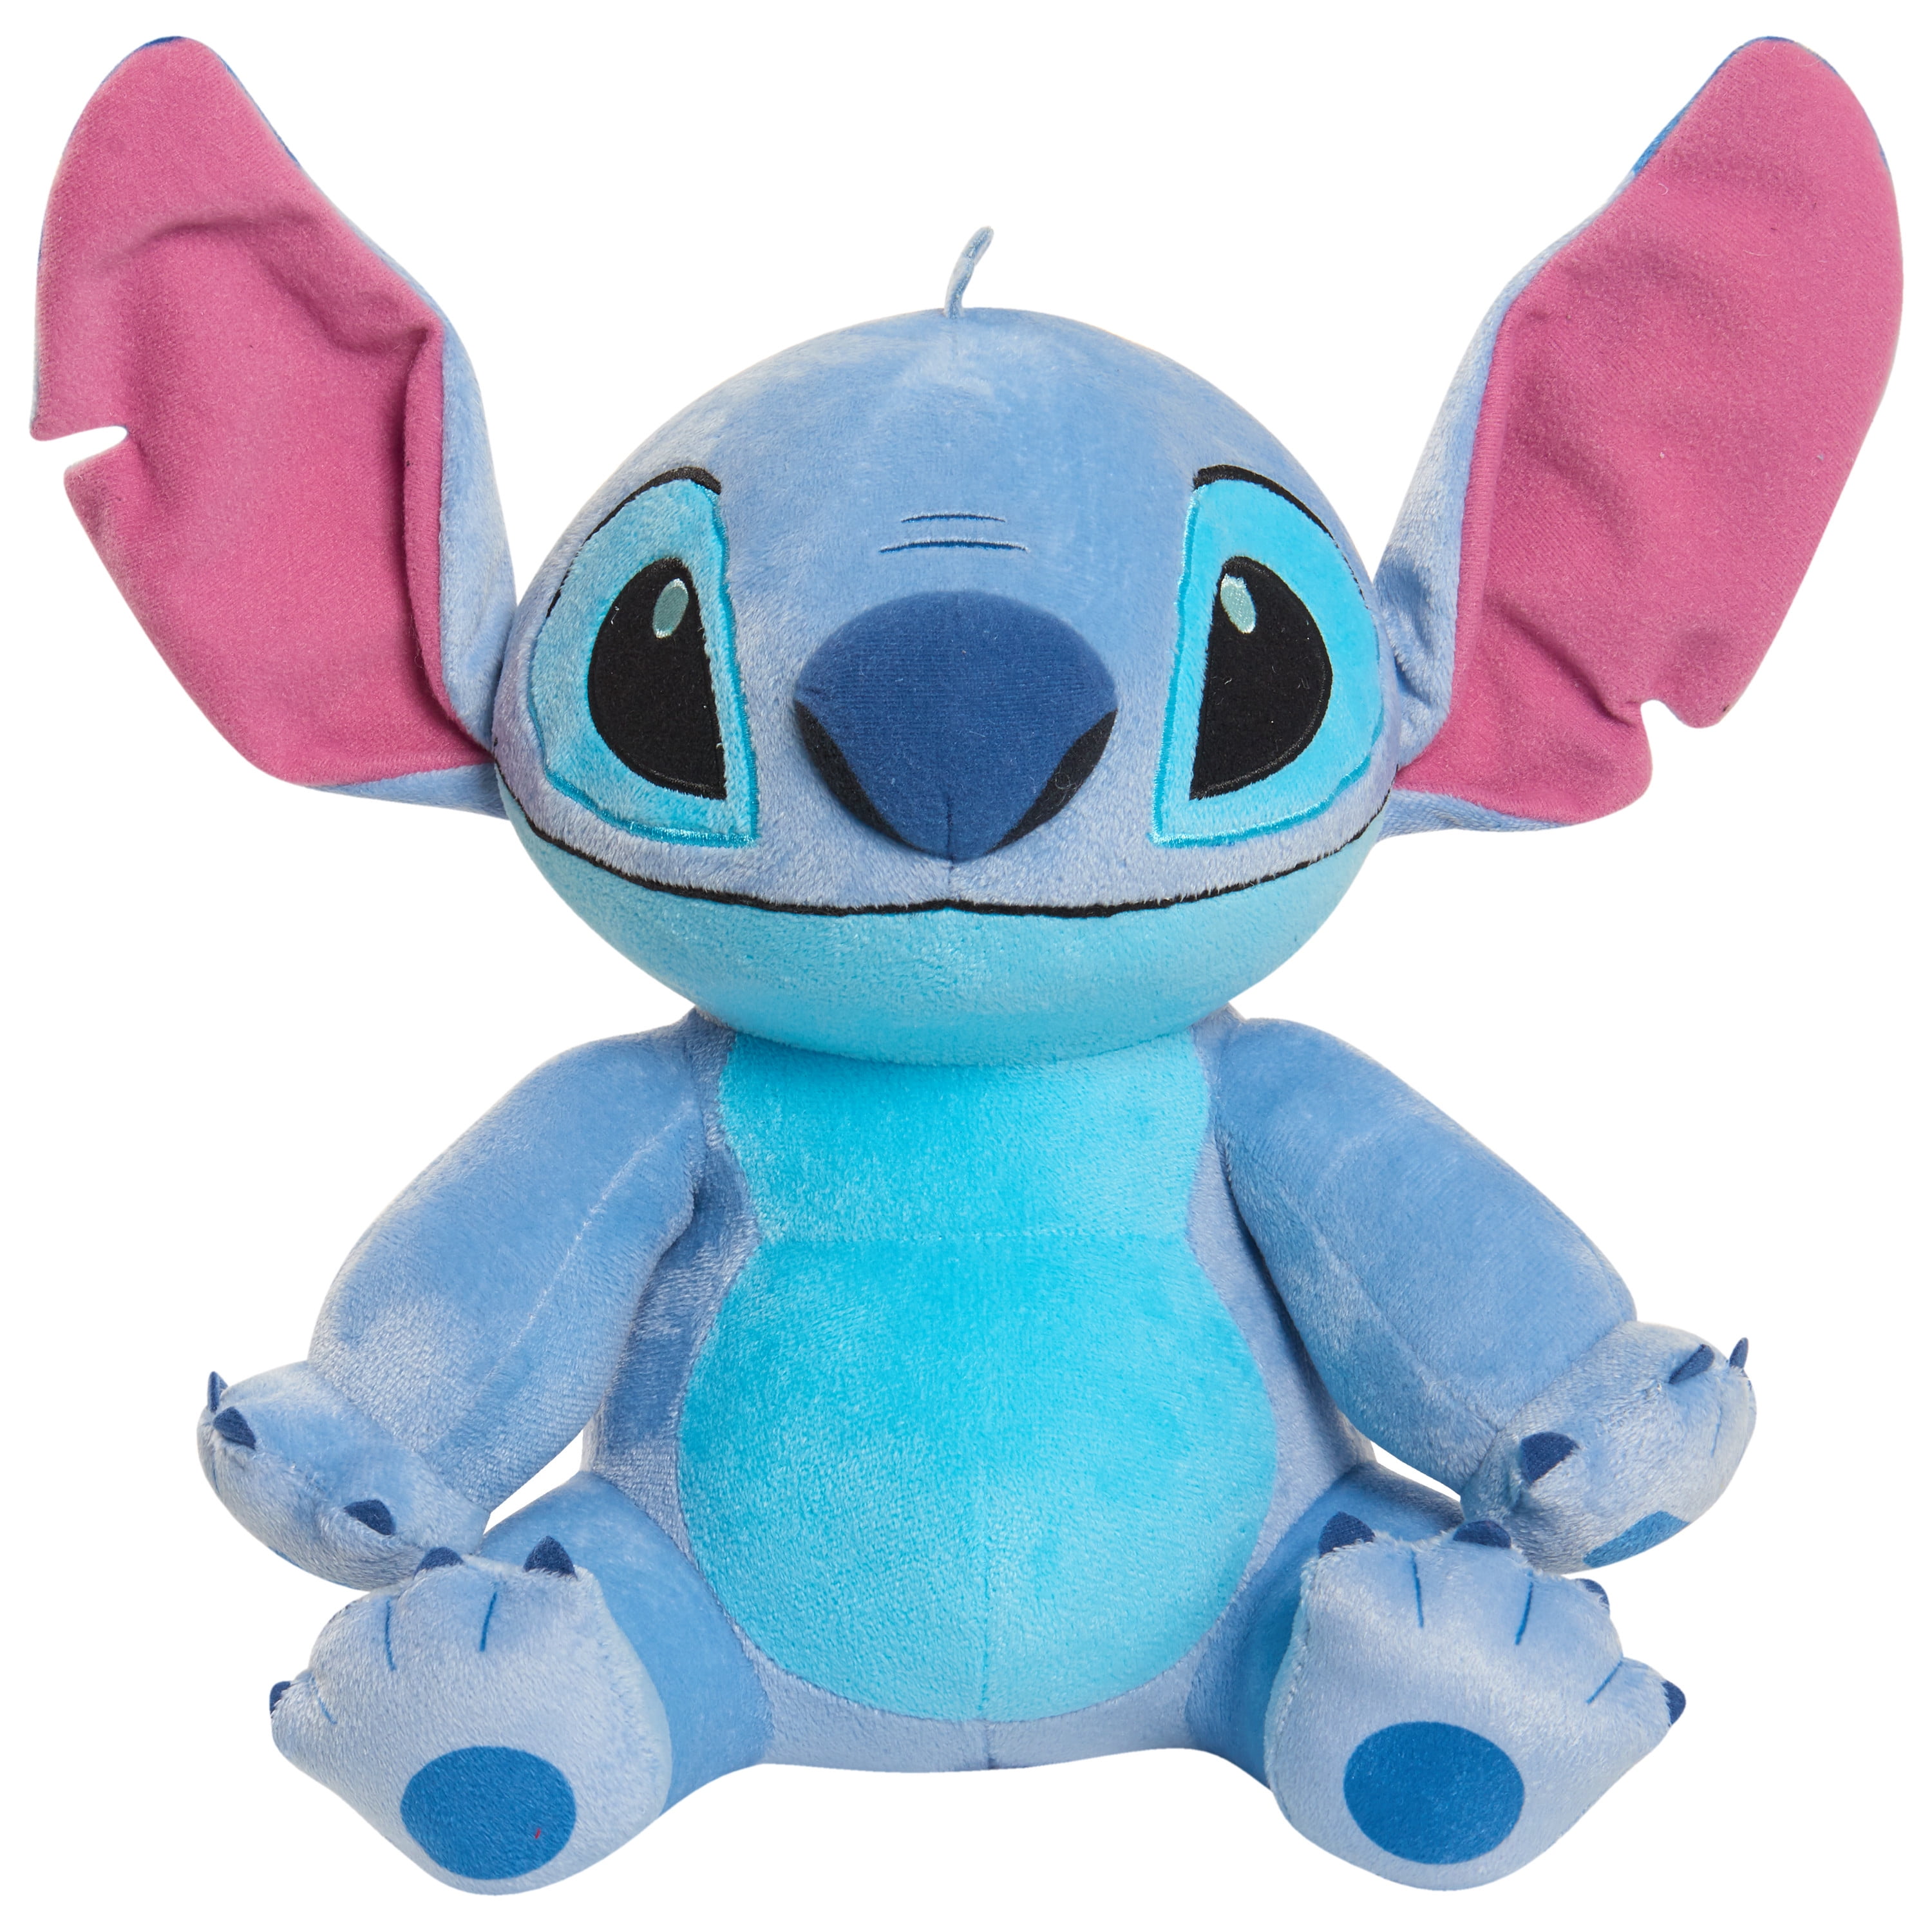 STITCH Disney Small 7-inch Plush Stuffed Animal, Stitch with Taco,  Officially Licensed Kids Toys for Ages 2 Up by Just Play